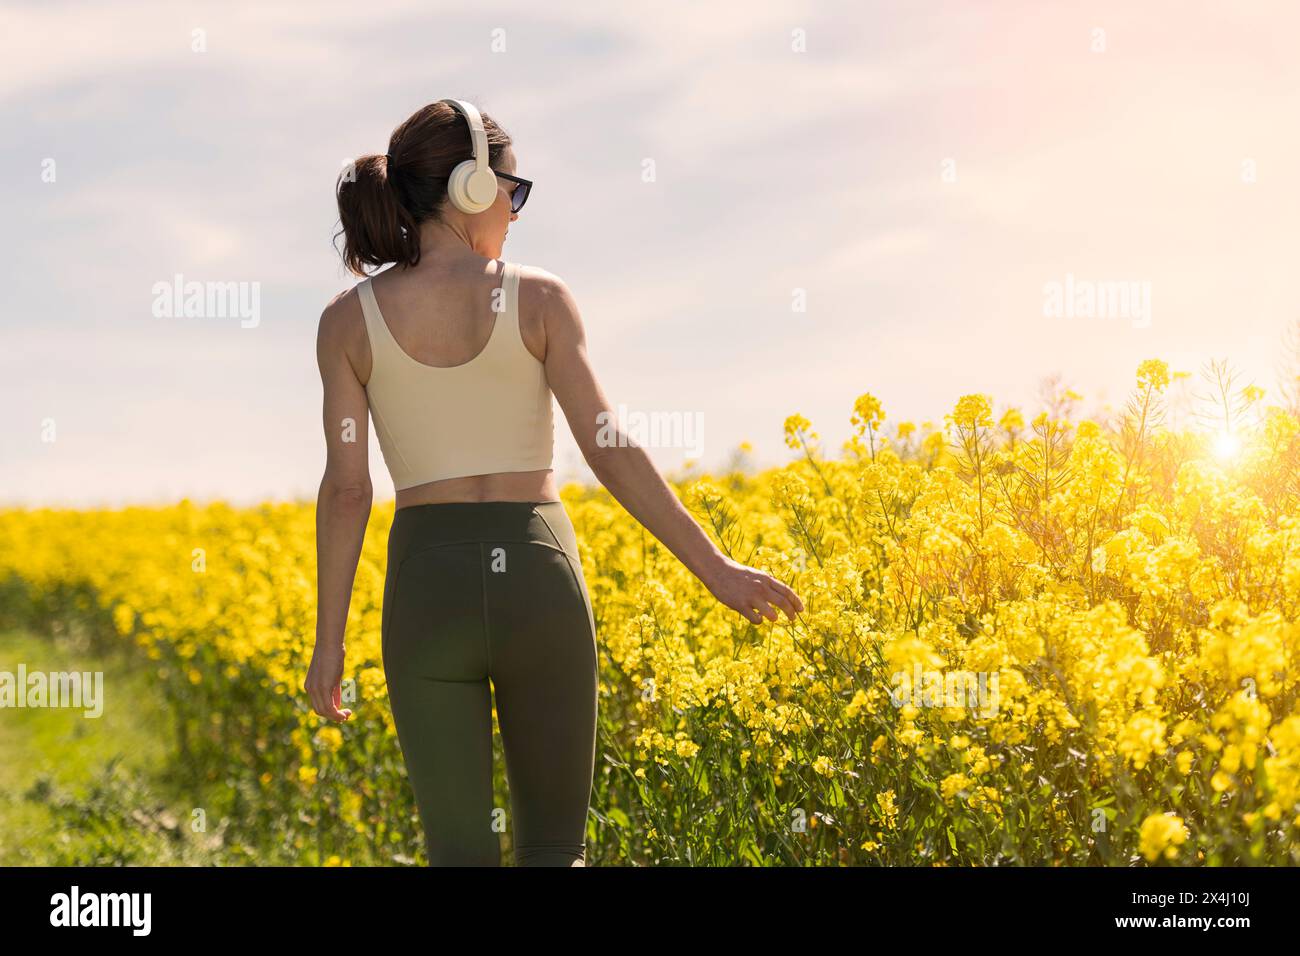 Sporty woman walking in the countryside through a yellow field, rear view. Stock Photo